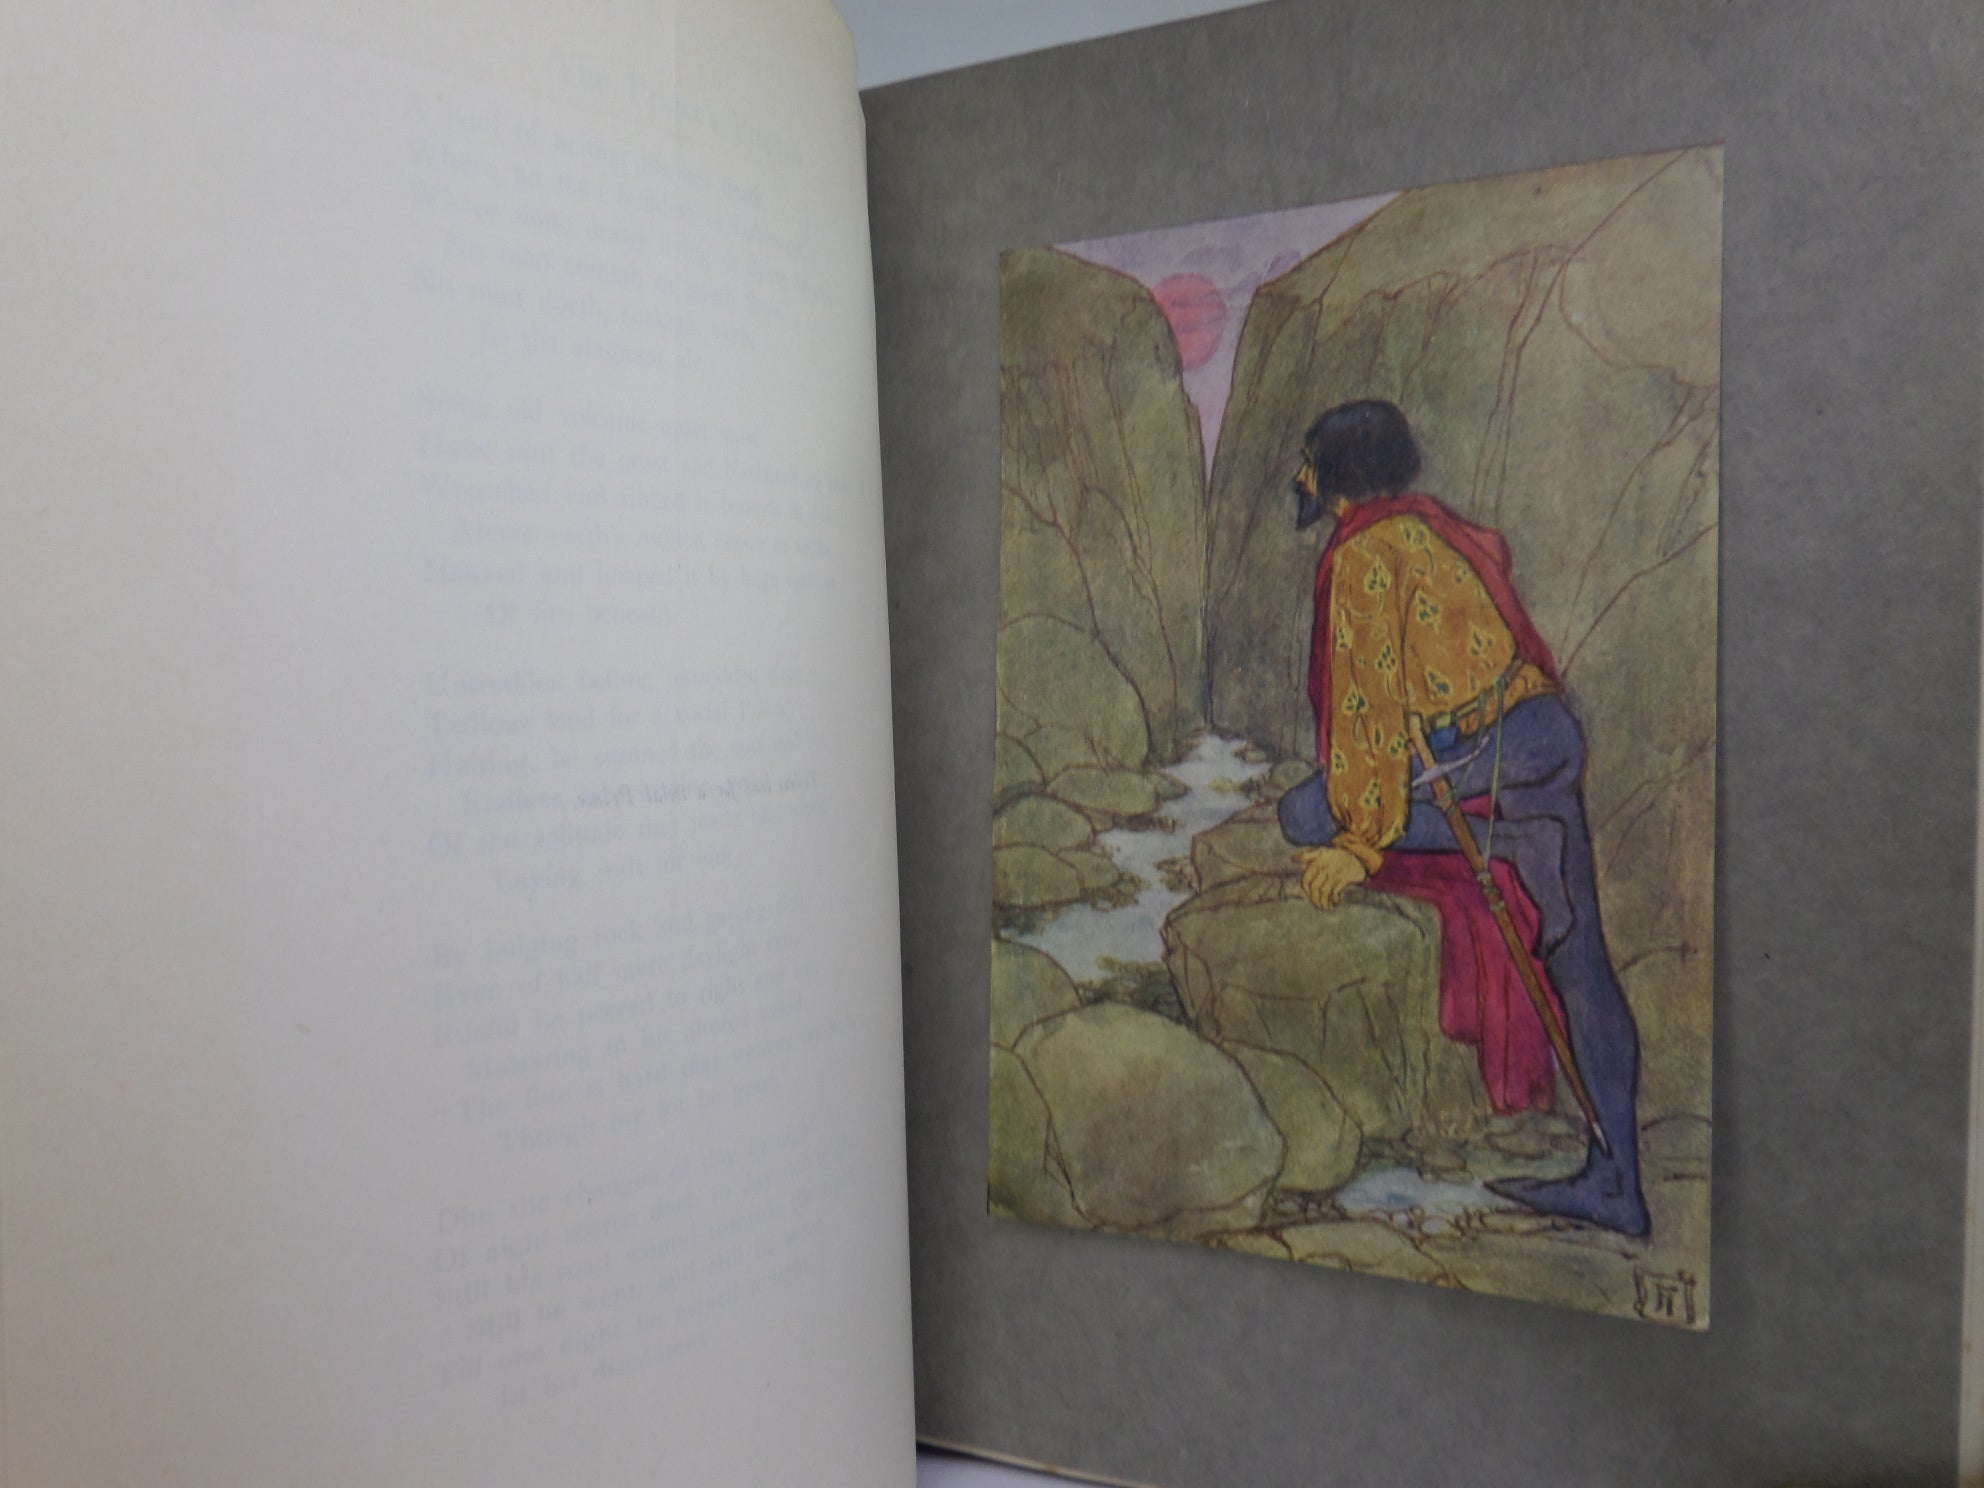 POEMS BY CHRISTINA ROSSETTI 1910 ILLUSTRATED BY FLORENCE HARRISON